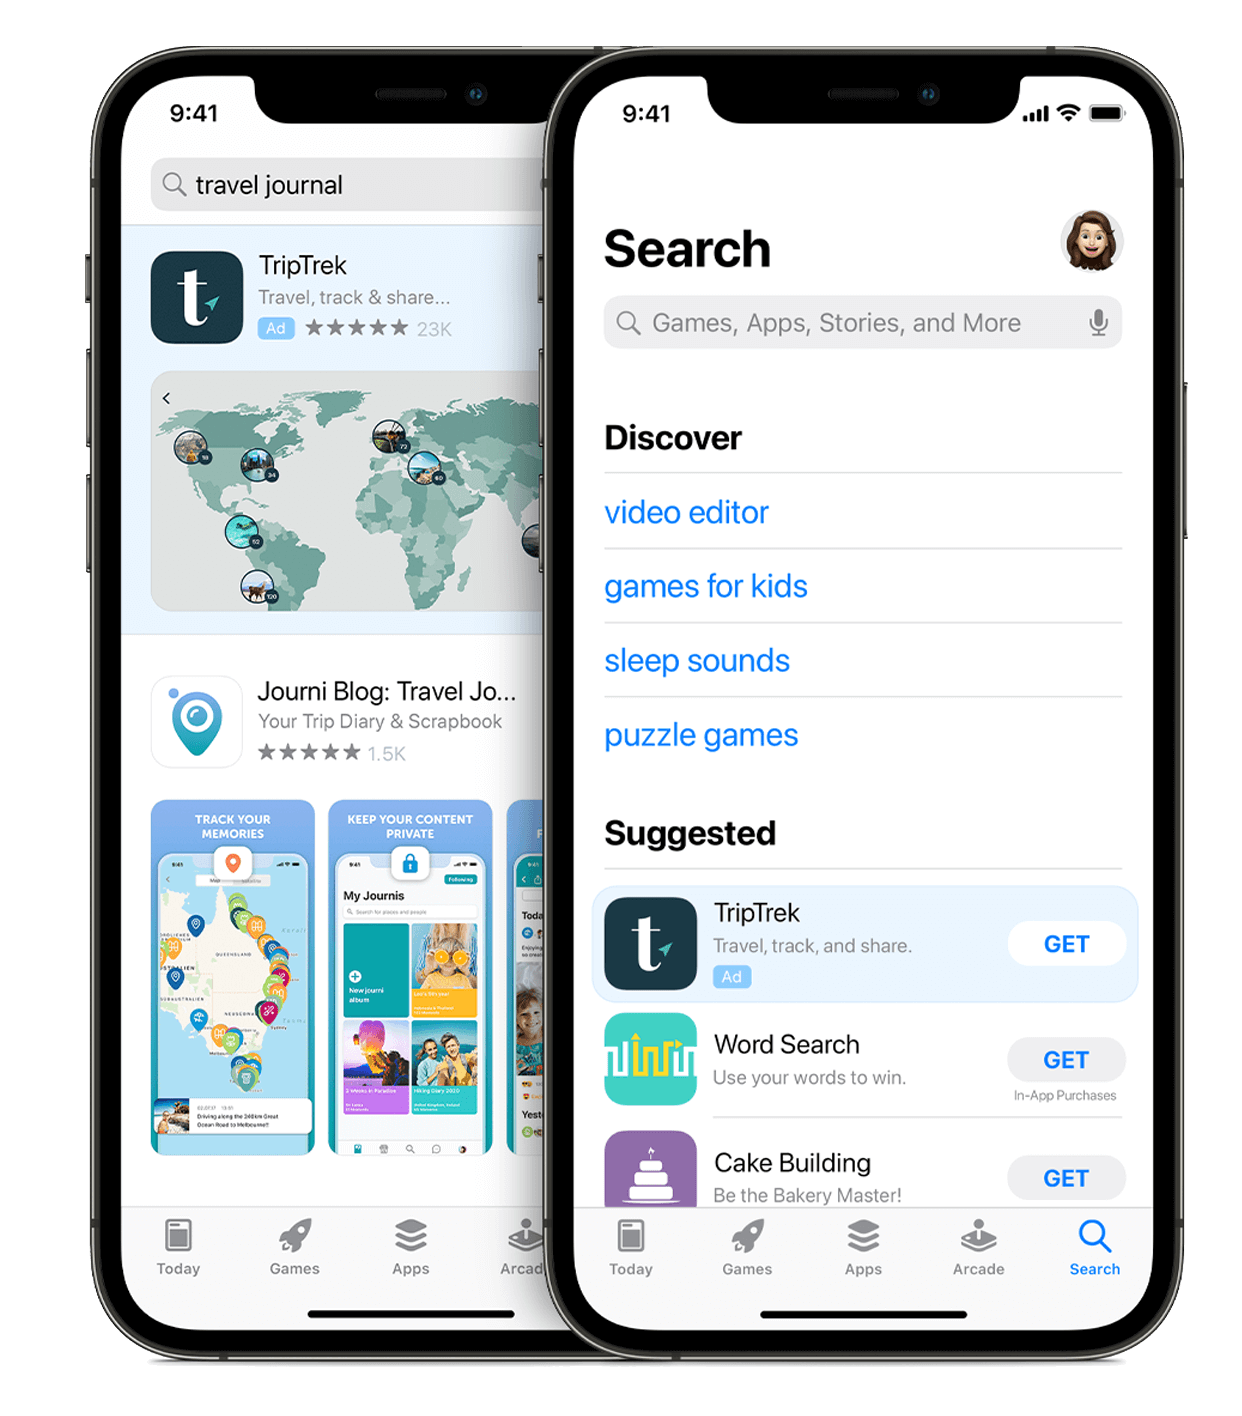 Apple Search Ads